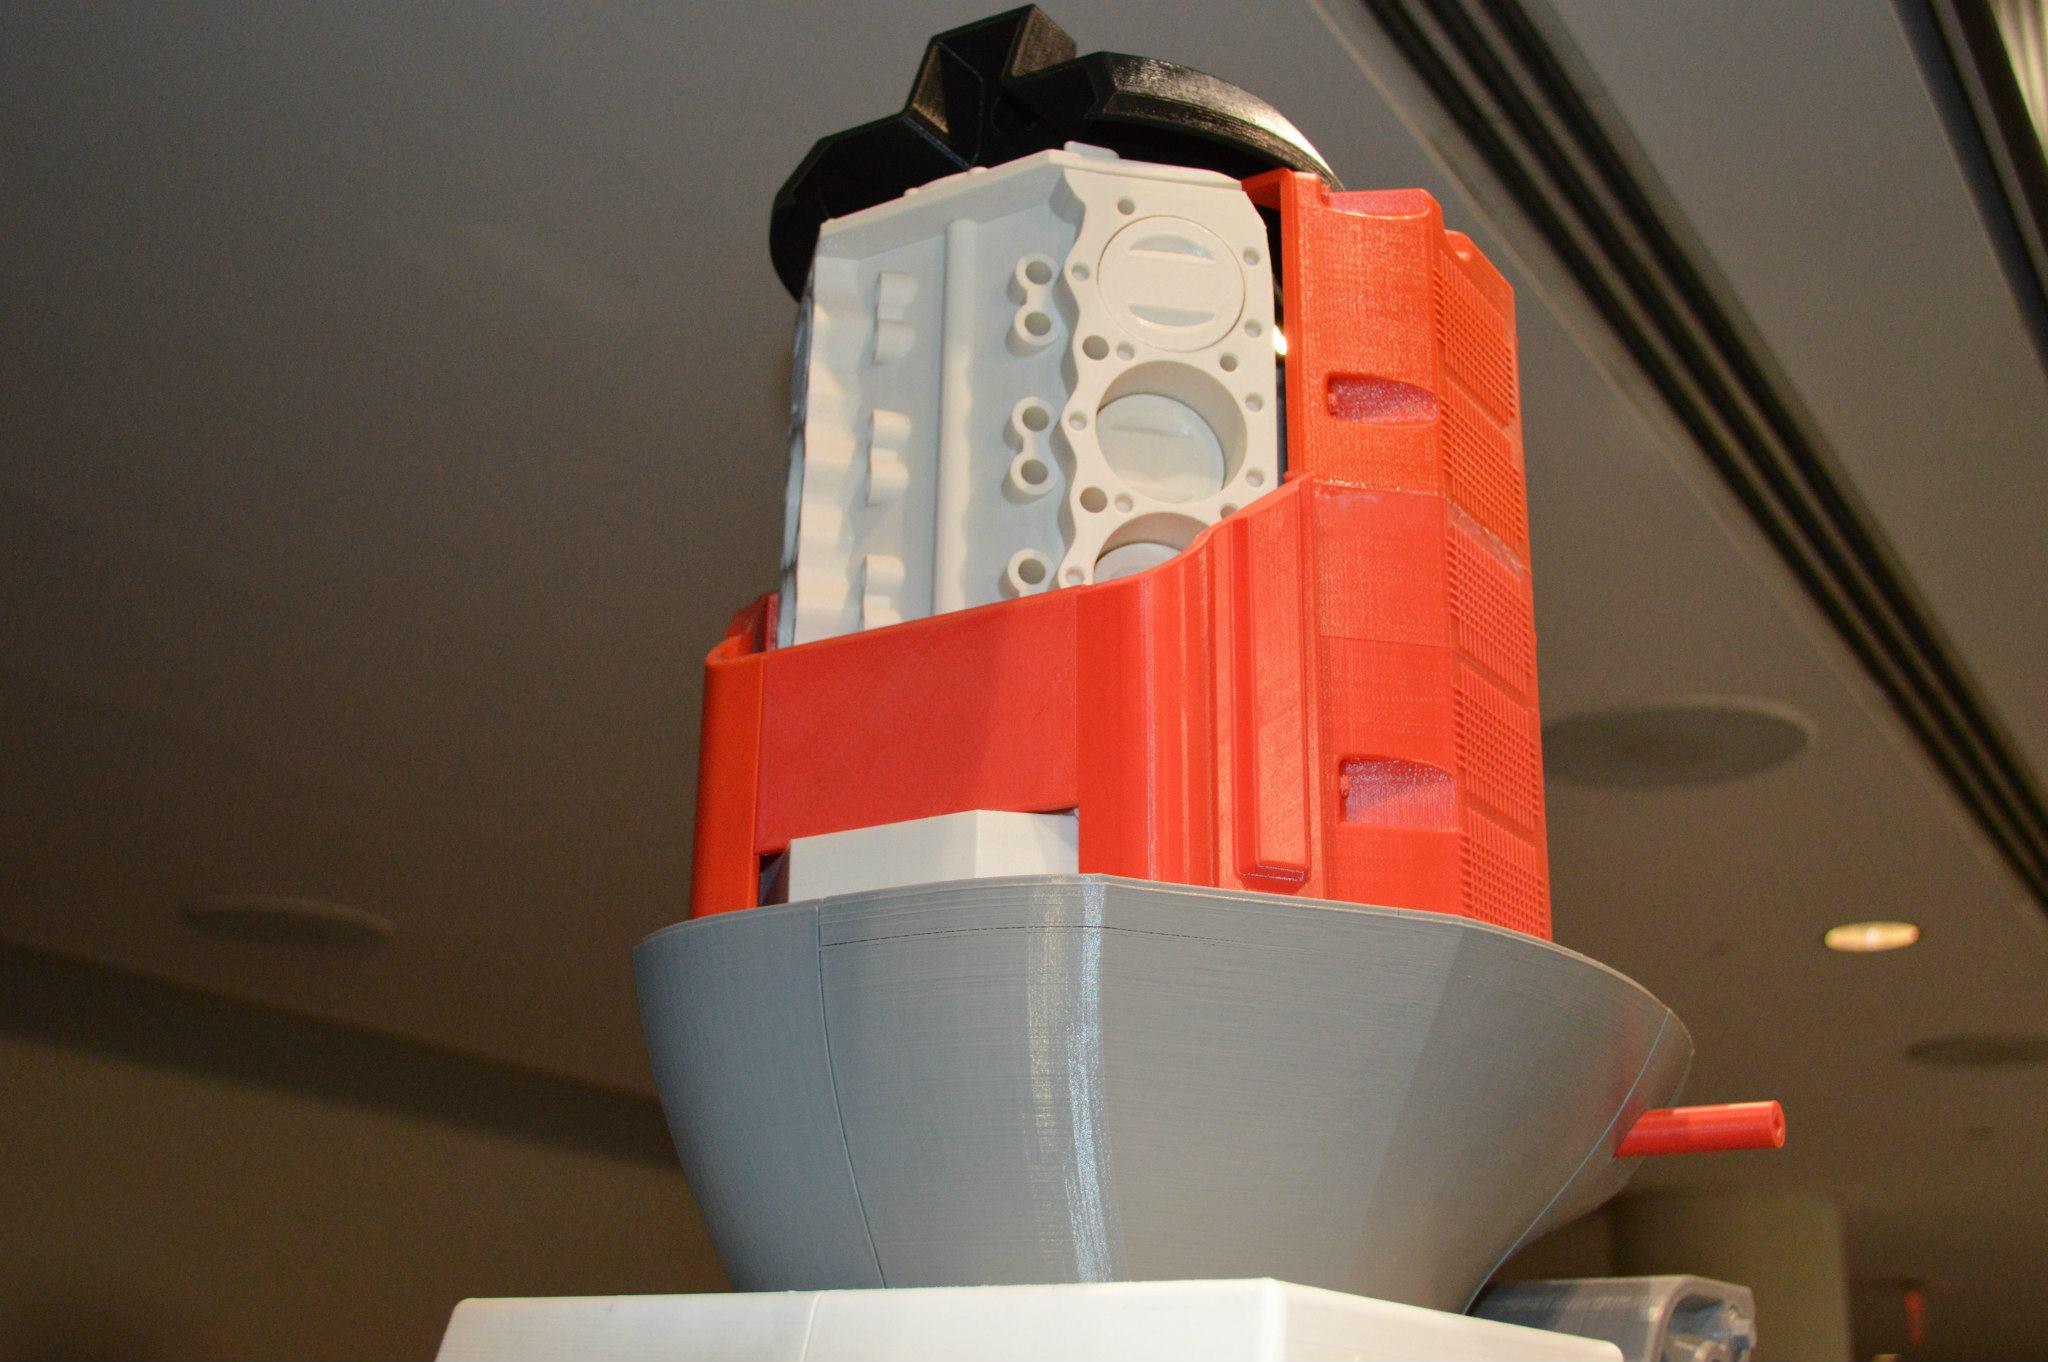 Amazing 3D Printed 4-Foot-Tall Outboard Boat Motor Was 